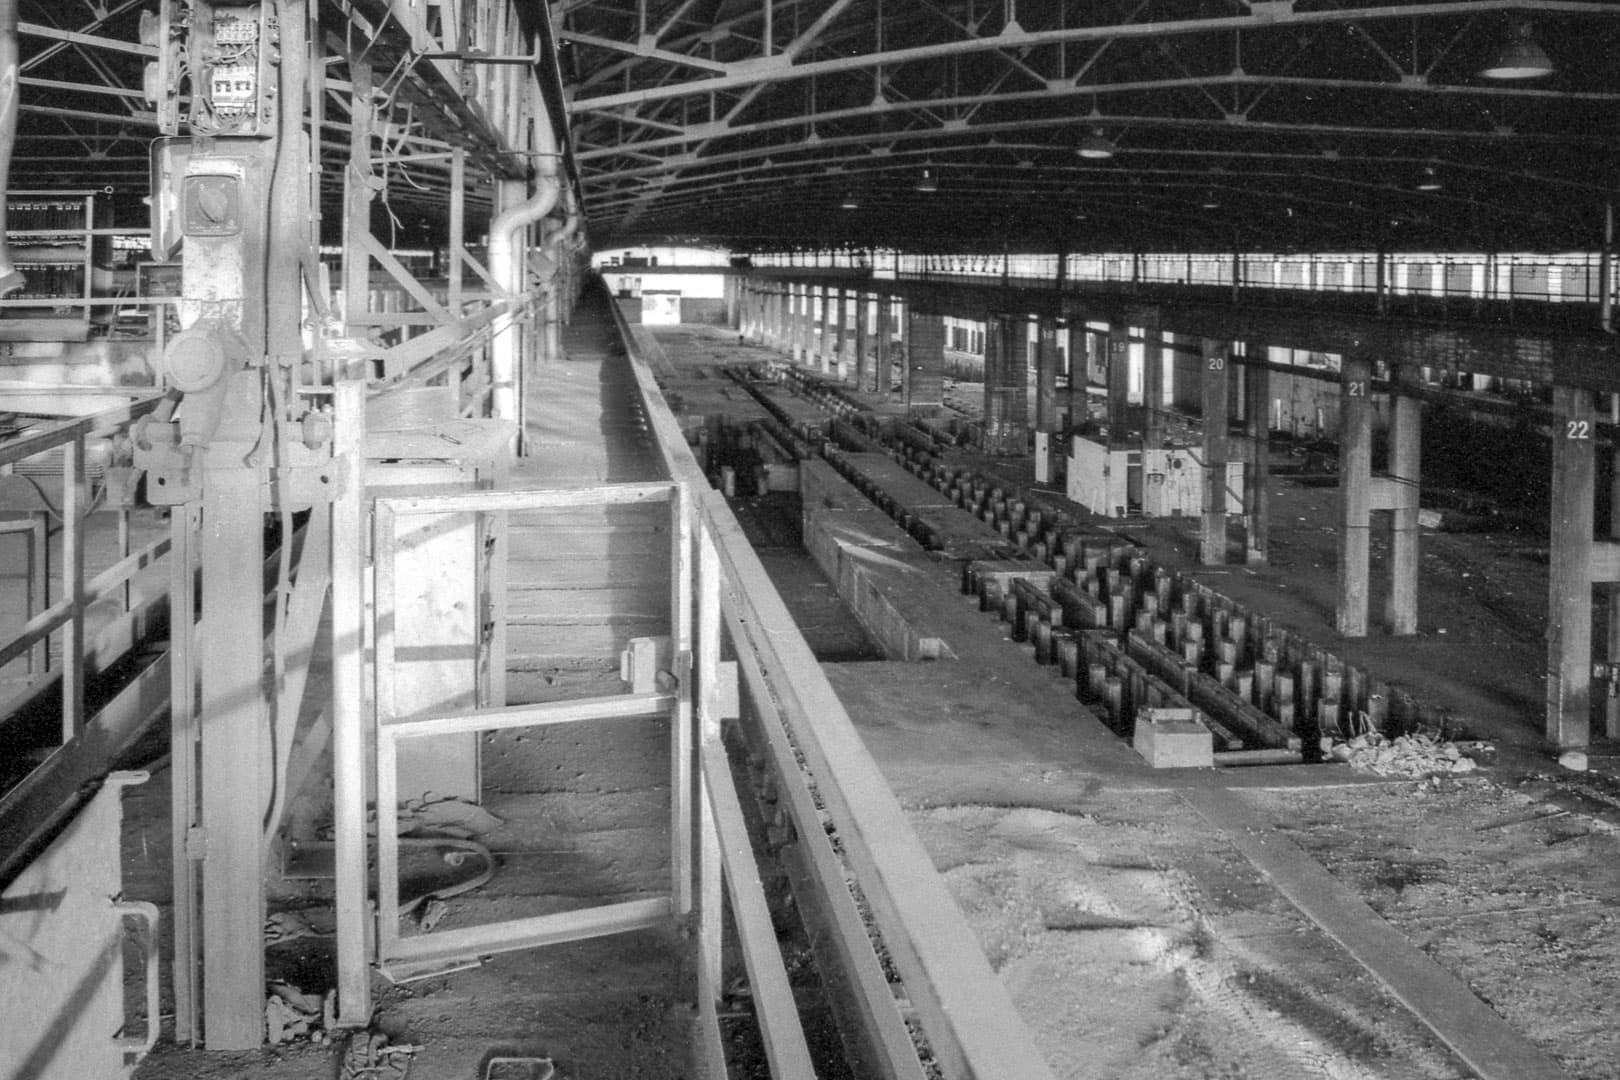 Abandoned “Lucchini” steel mill in Turin, Italy – Black&White 35mm film